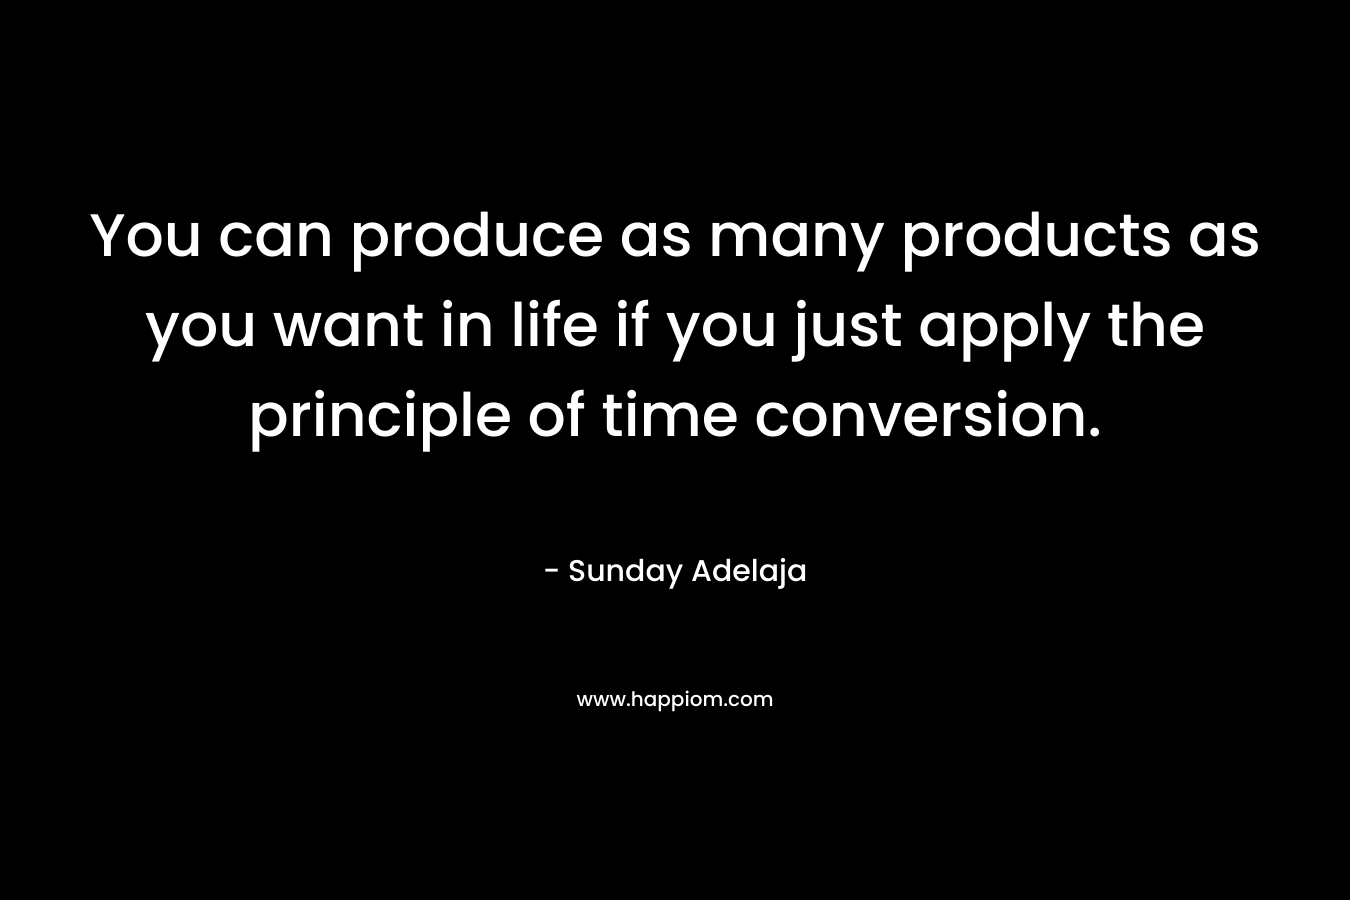 You can produce as many products as you want in life if you just apply the principle of time conversion.